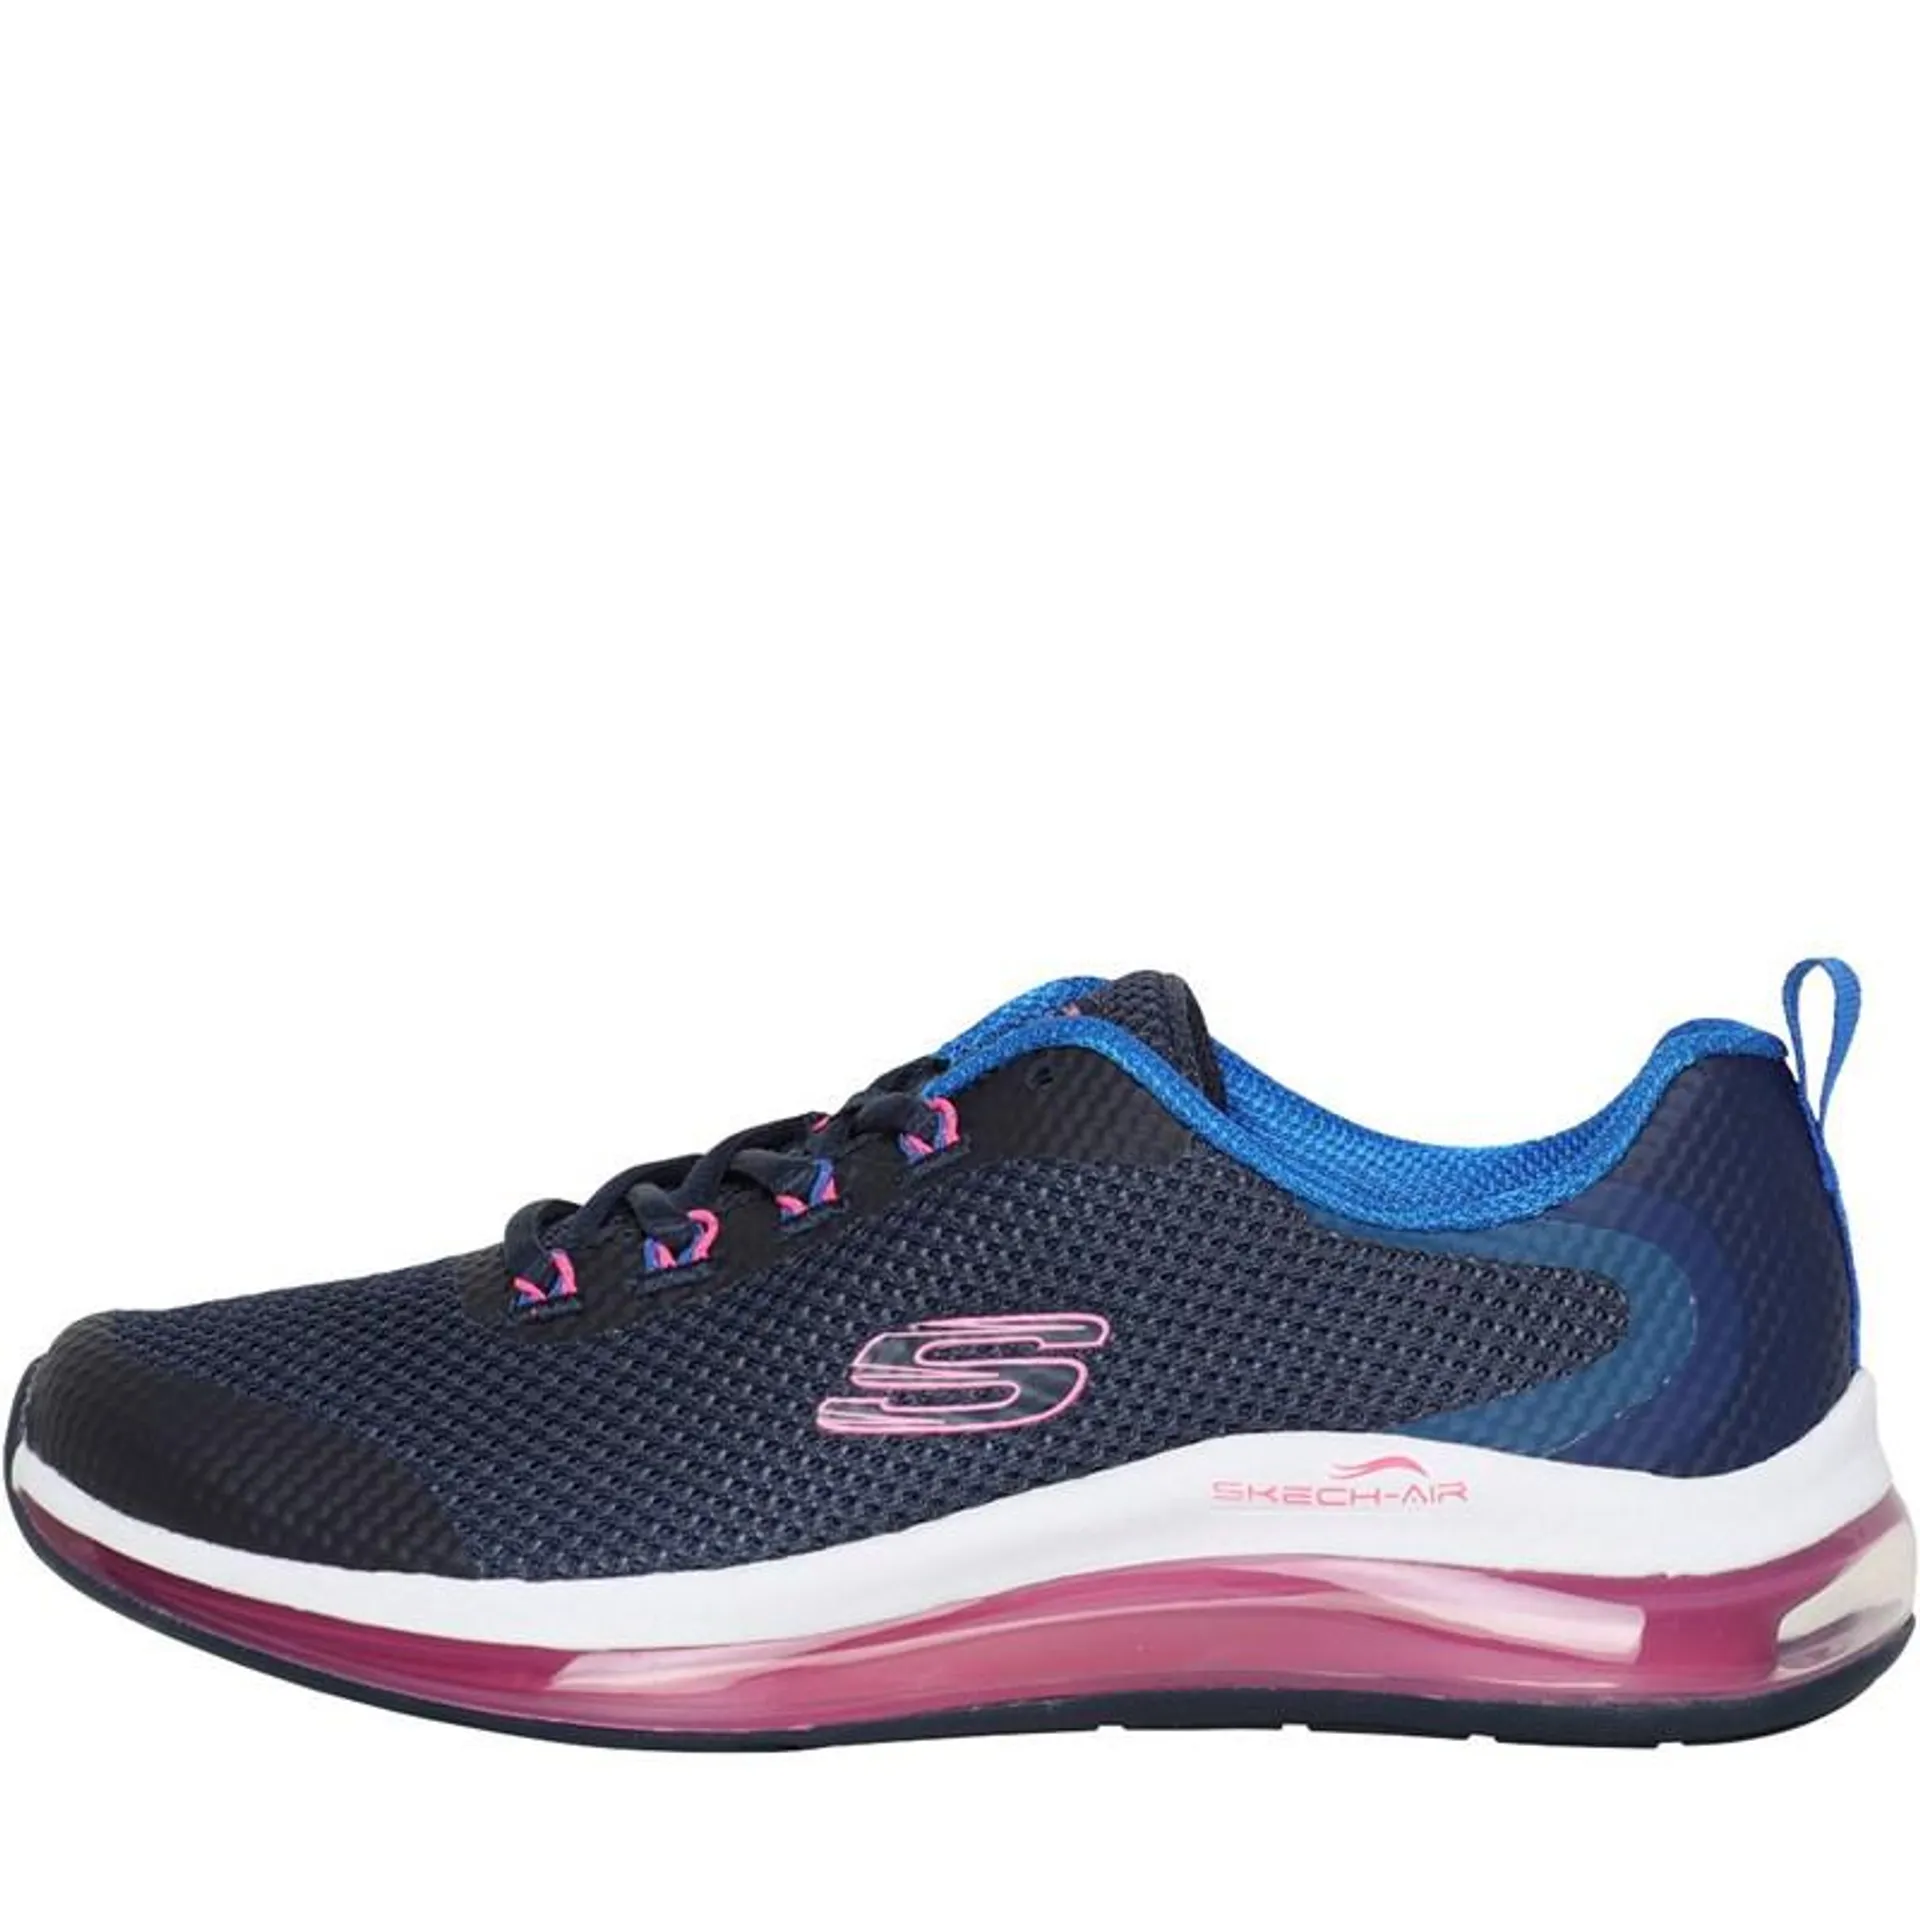 SKECHERS Womens Skech Air Element 2.0 Looking Fast Trainers Navy/Hot Pink